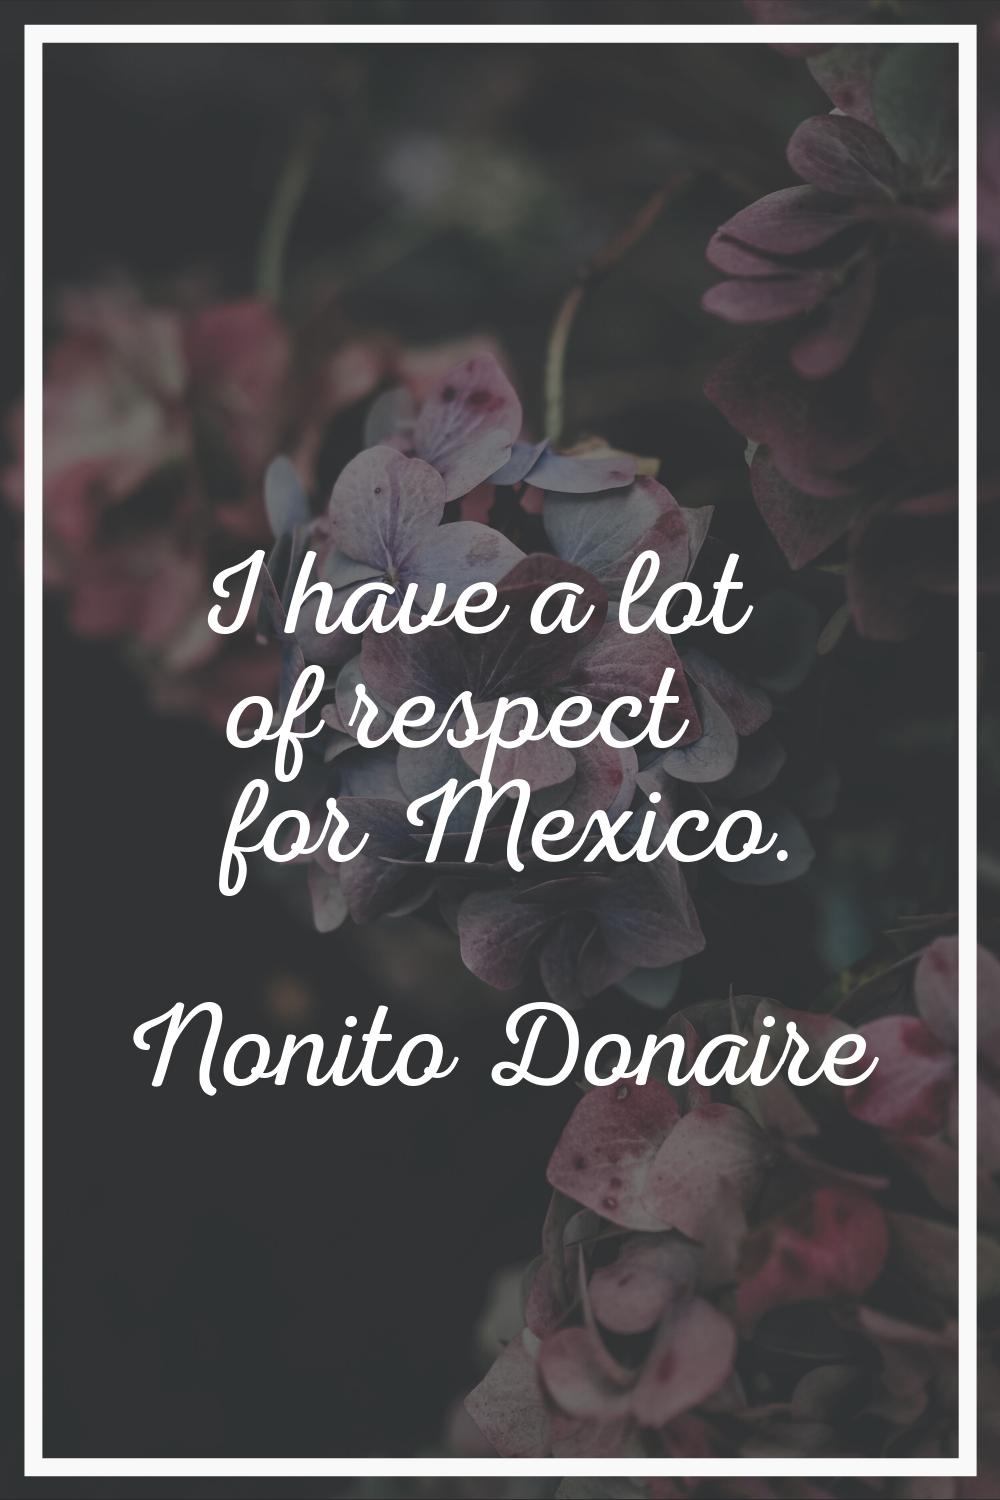 I have a lot of respect for Mexico.